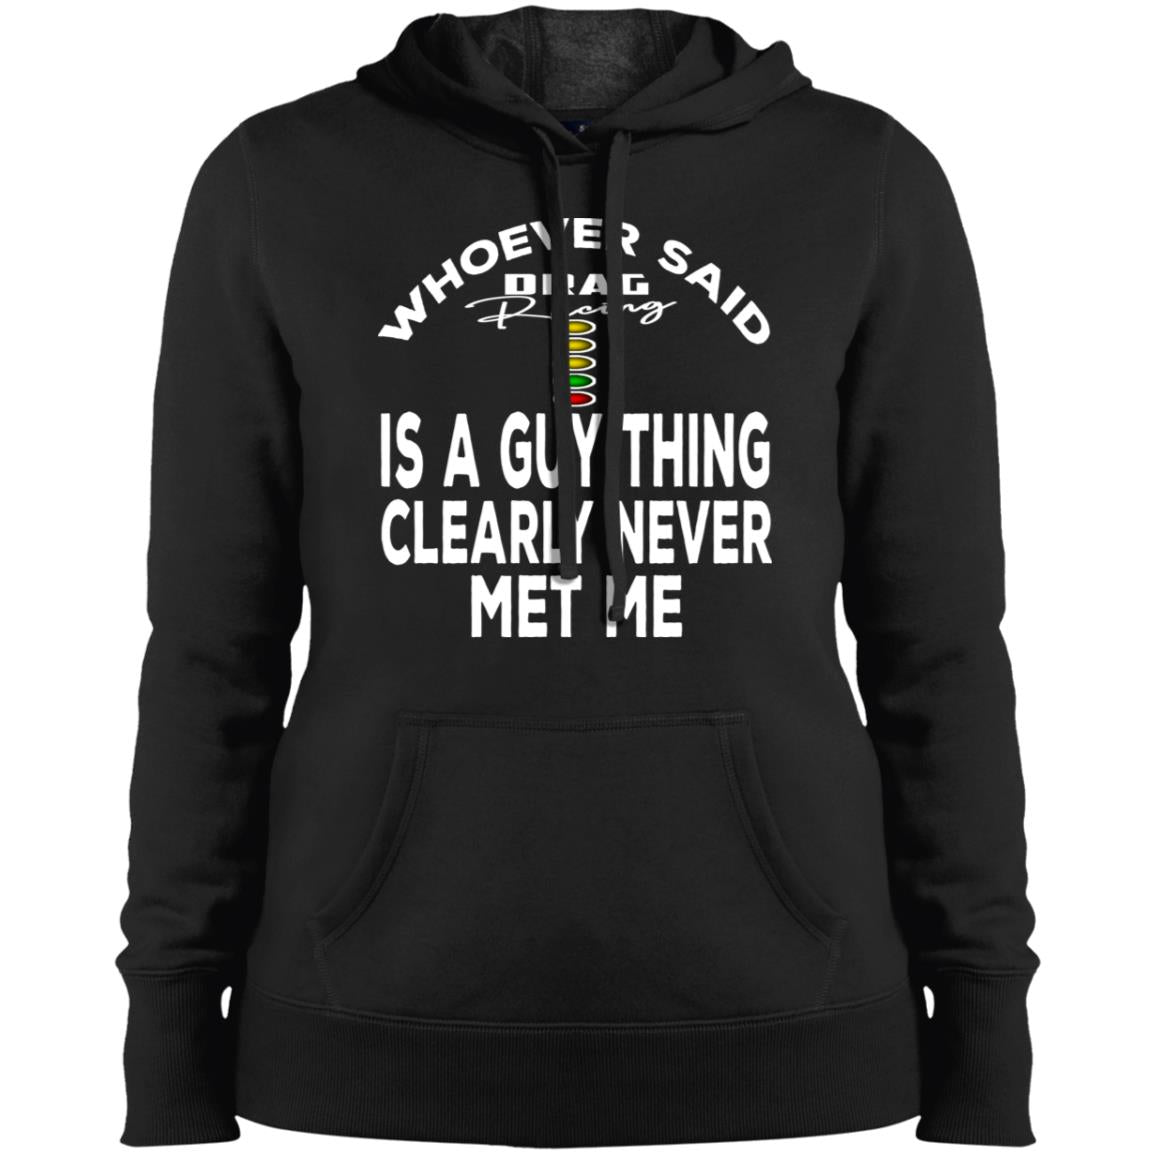 Whoever said drag racing is guy thing clearly never met me T-shirts